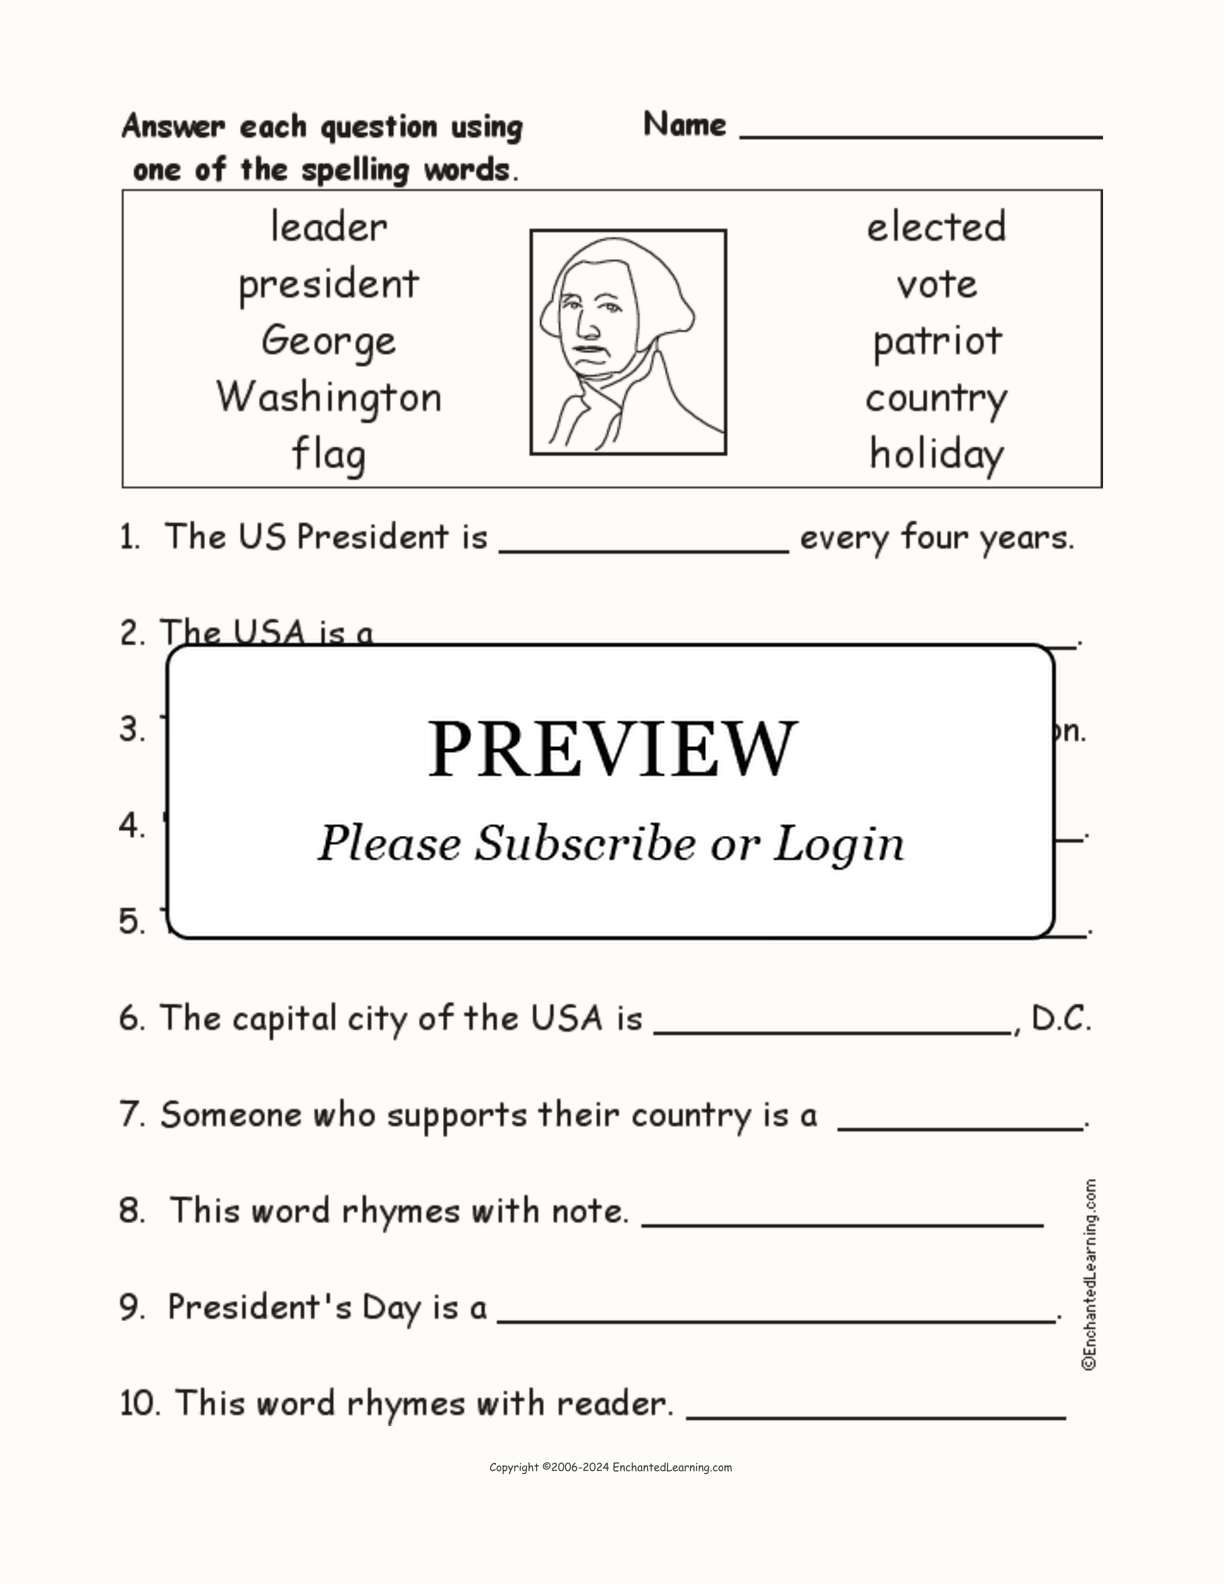 Presidents' Day Spelling Word Questions interactive worksheet page 1